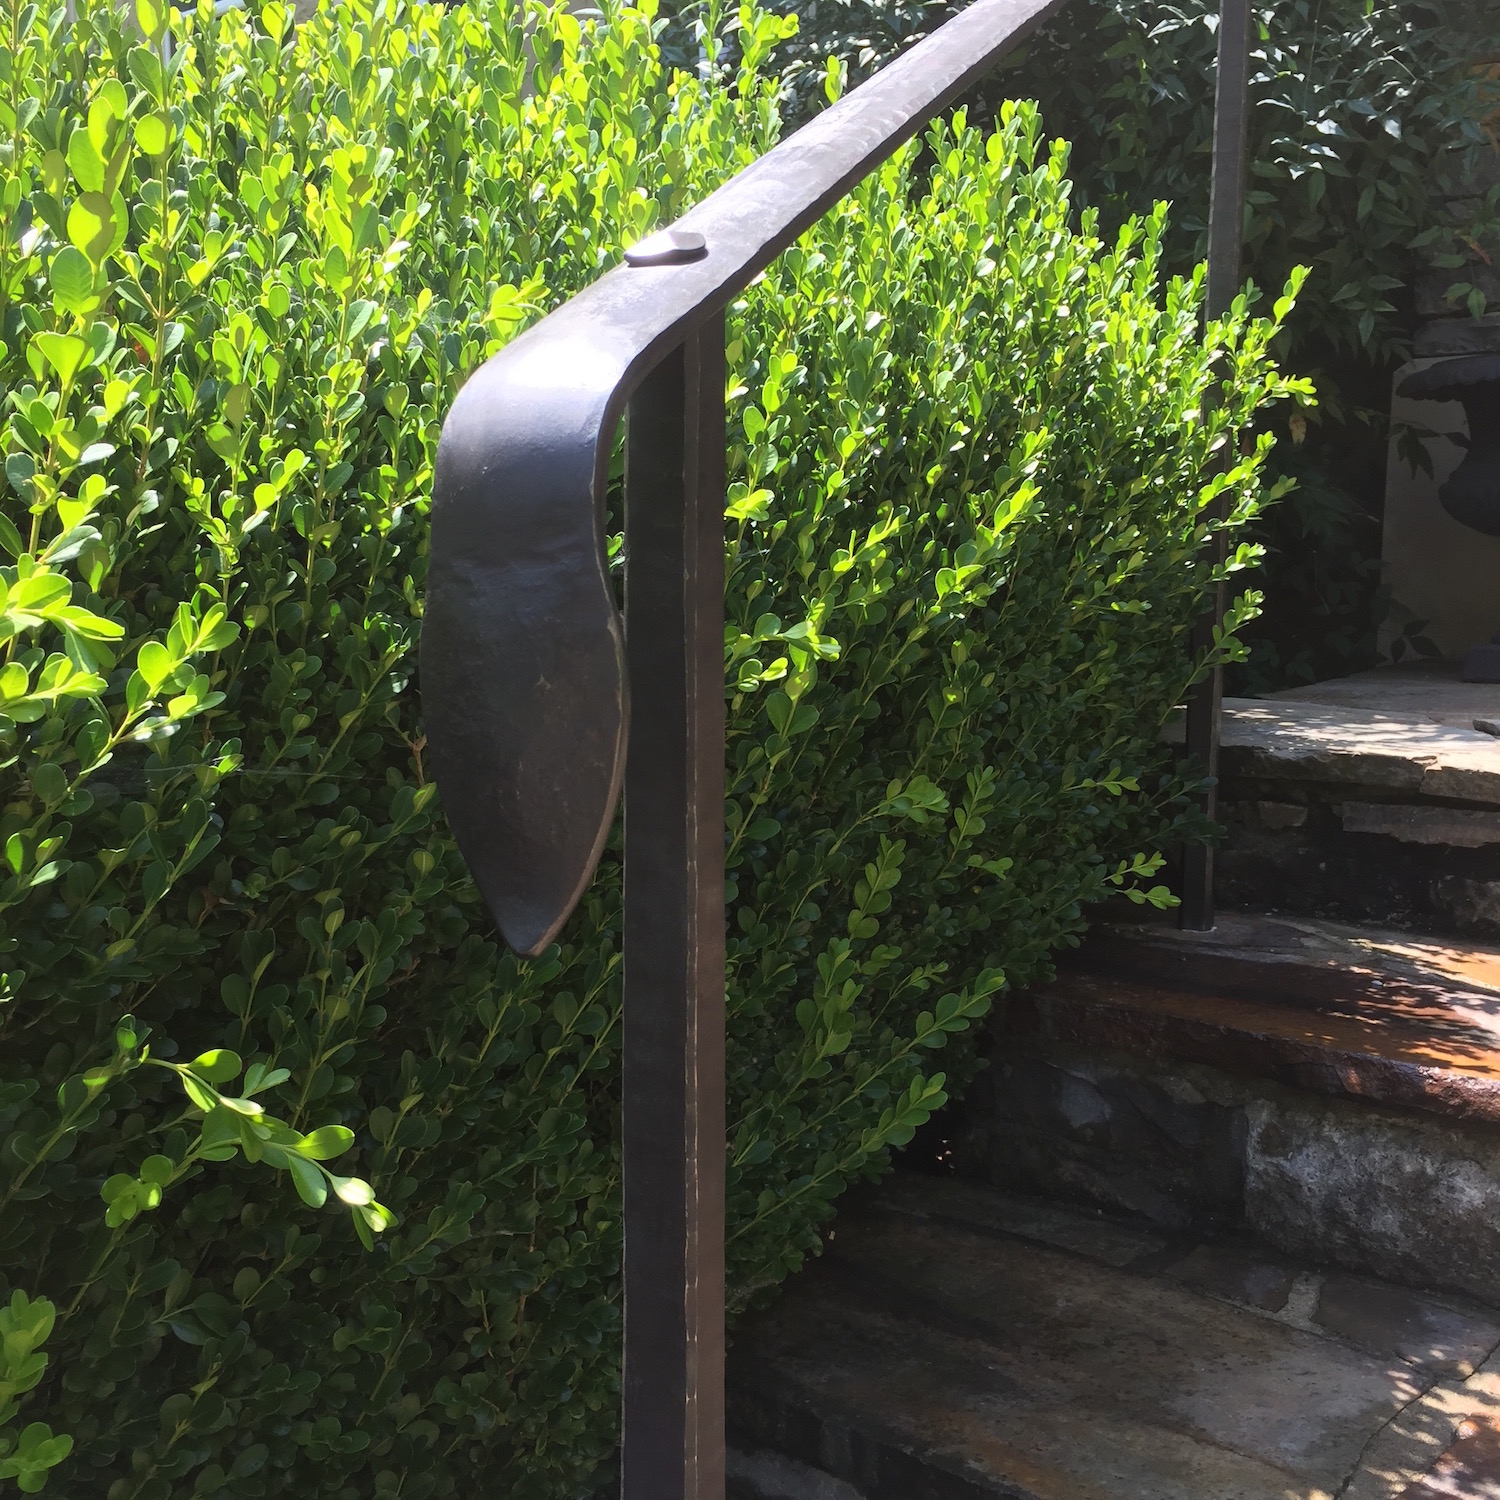  Exterior Rail, 304 Stainless Steel, 2017 